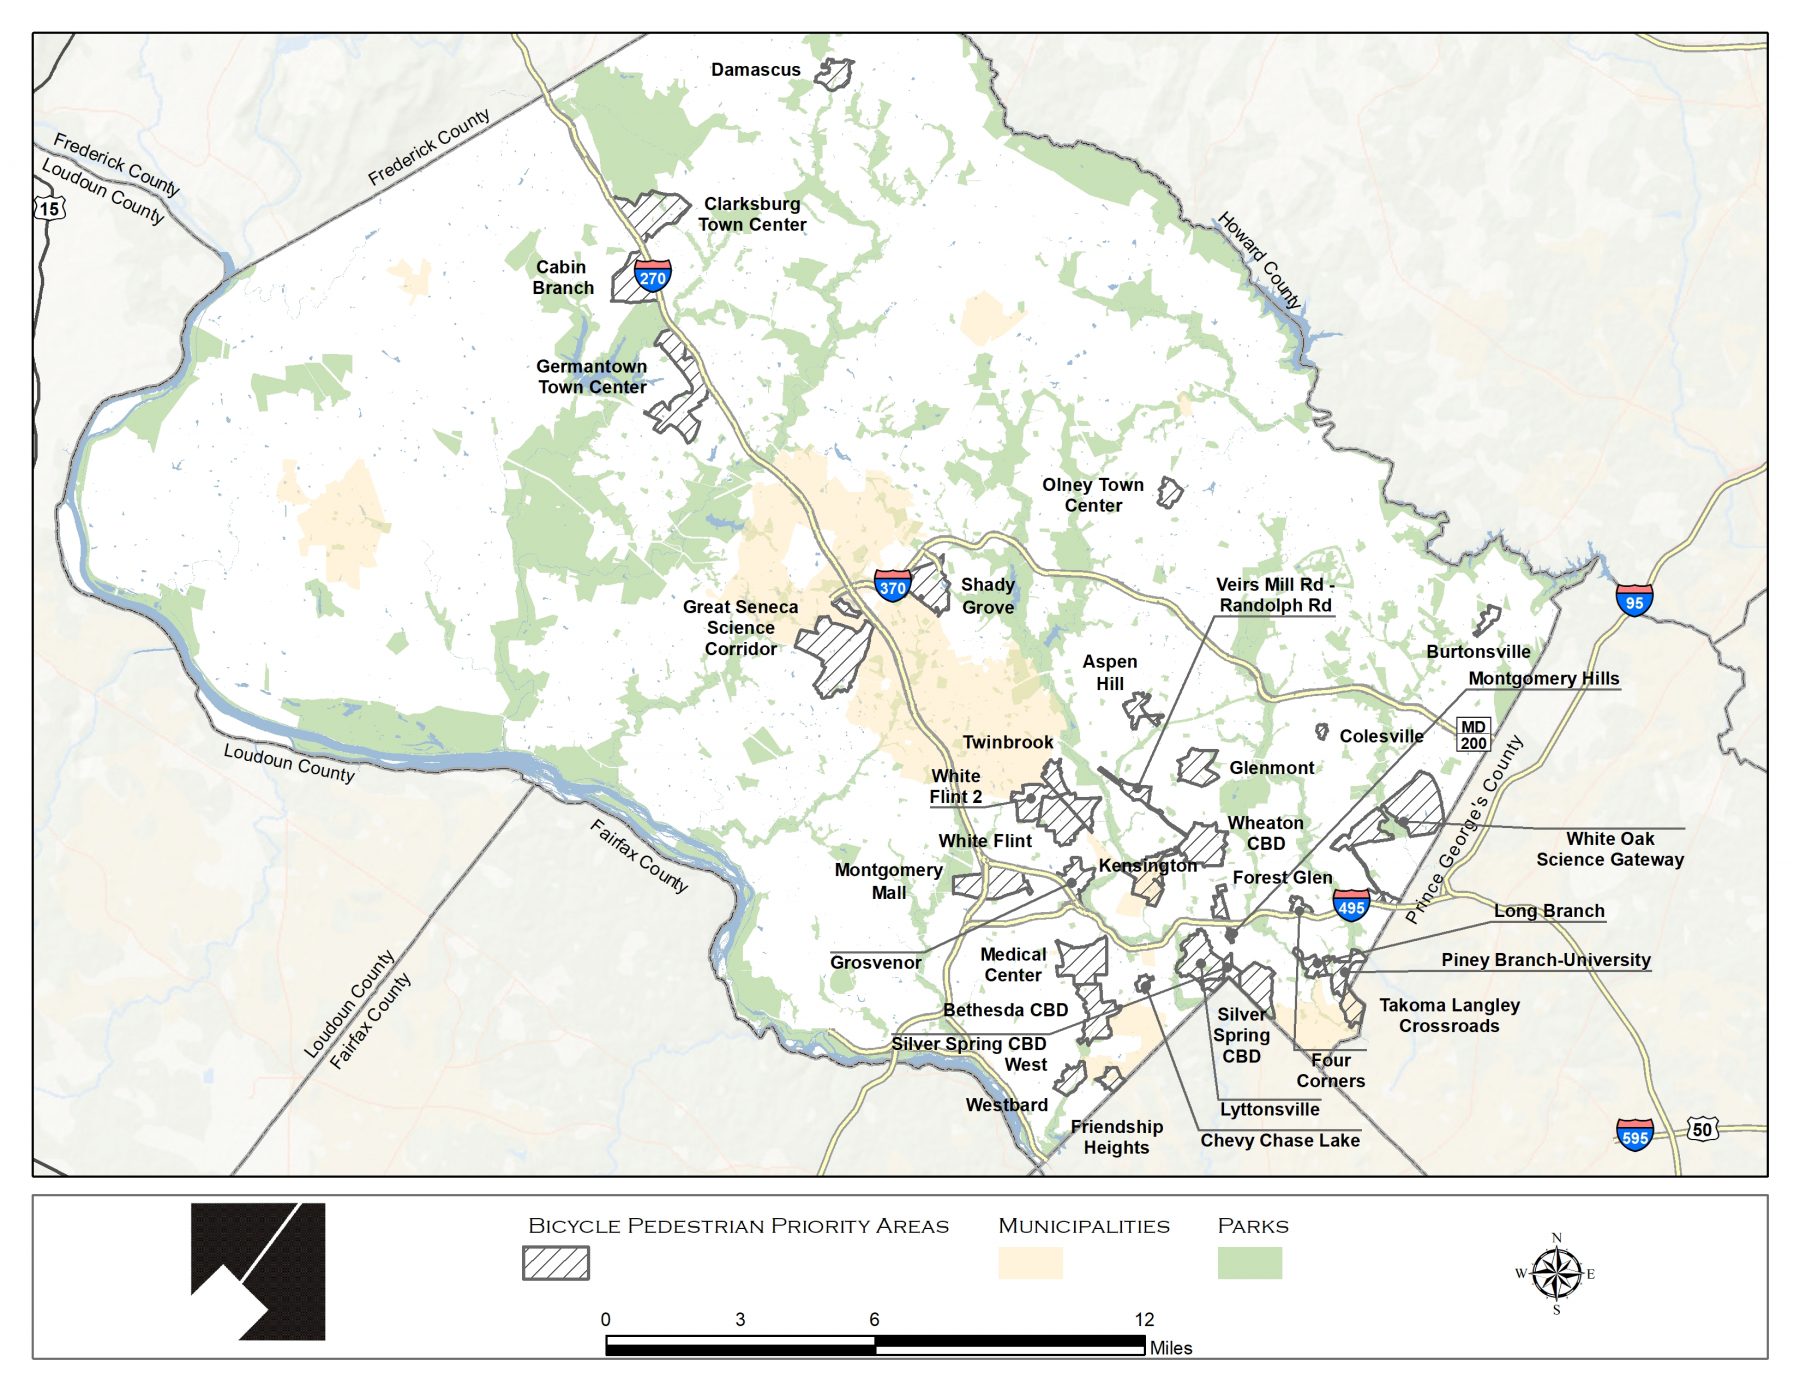 Map of Bicycle Pedestrian Priority Areas in Montgomery County